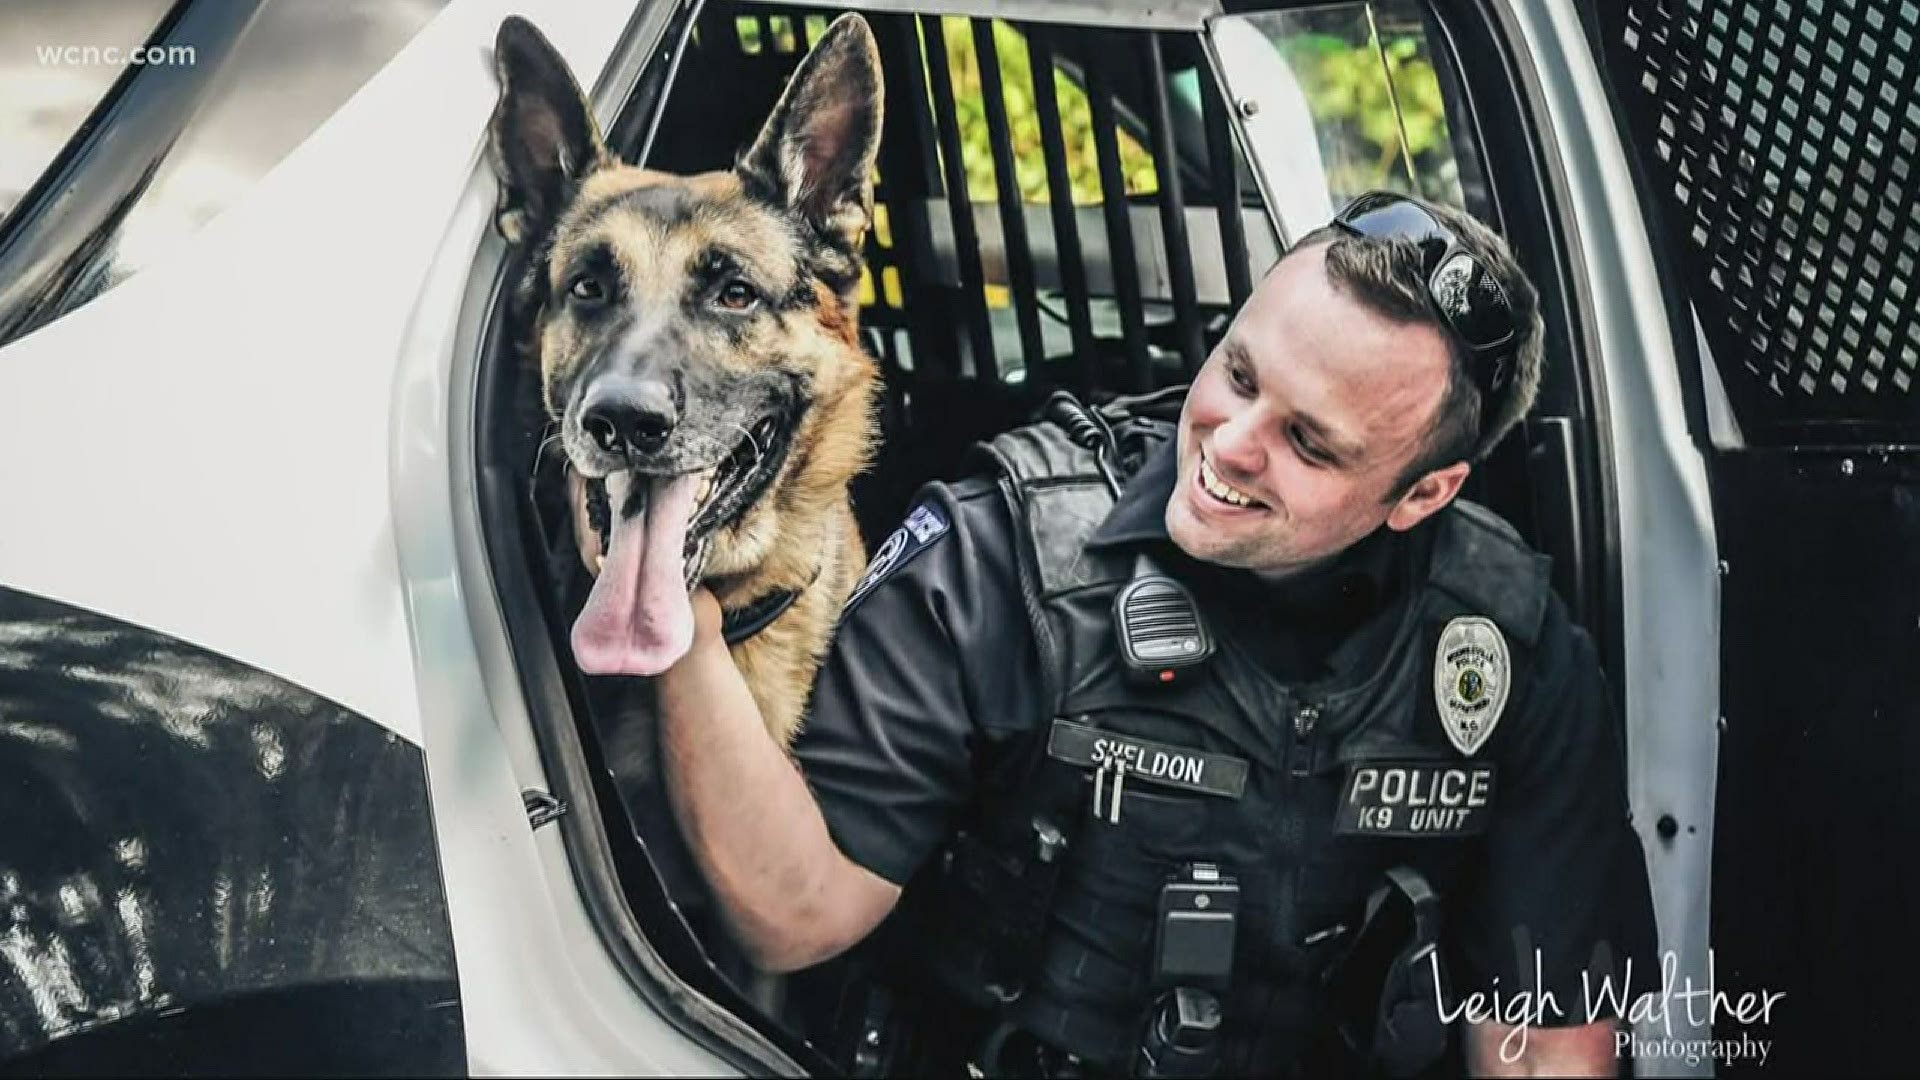 It’s been one year since Mooresville Police Officer Jordan Sheldon was shot and killed at a traffic stop. His death sparked numerous changes within the department.